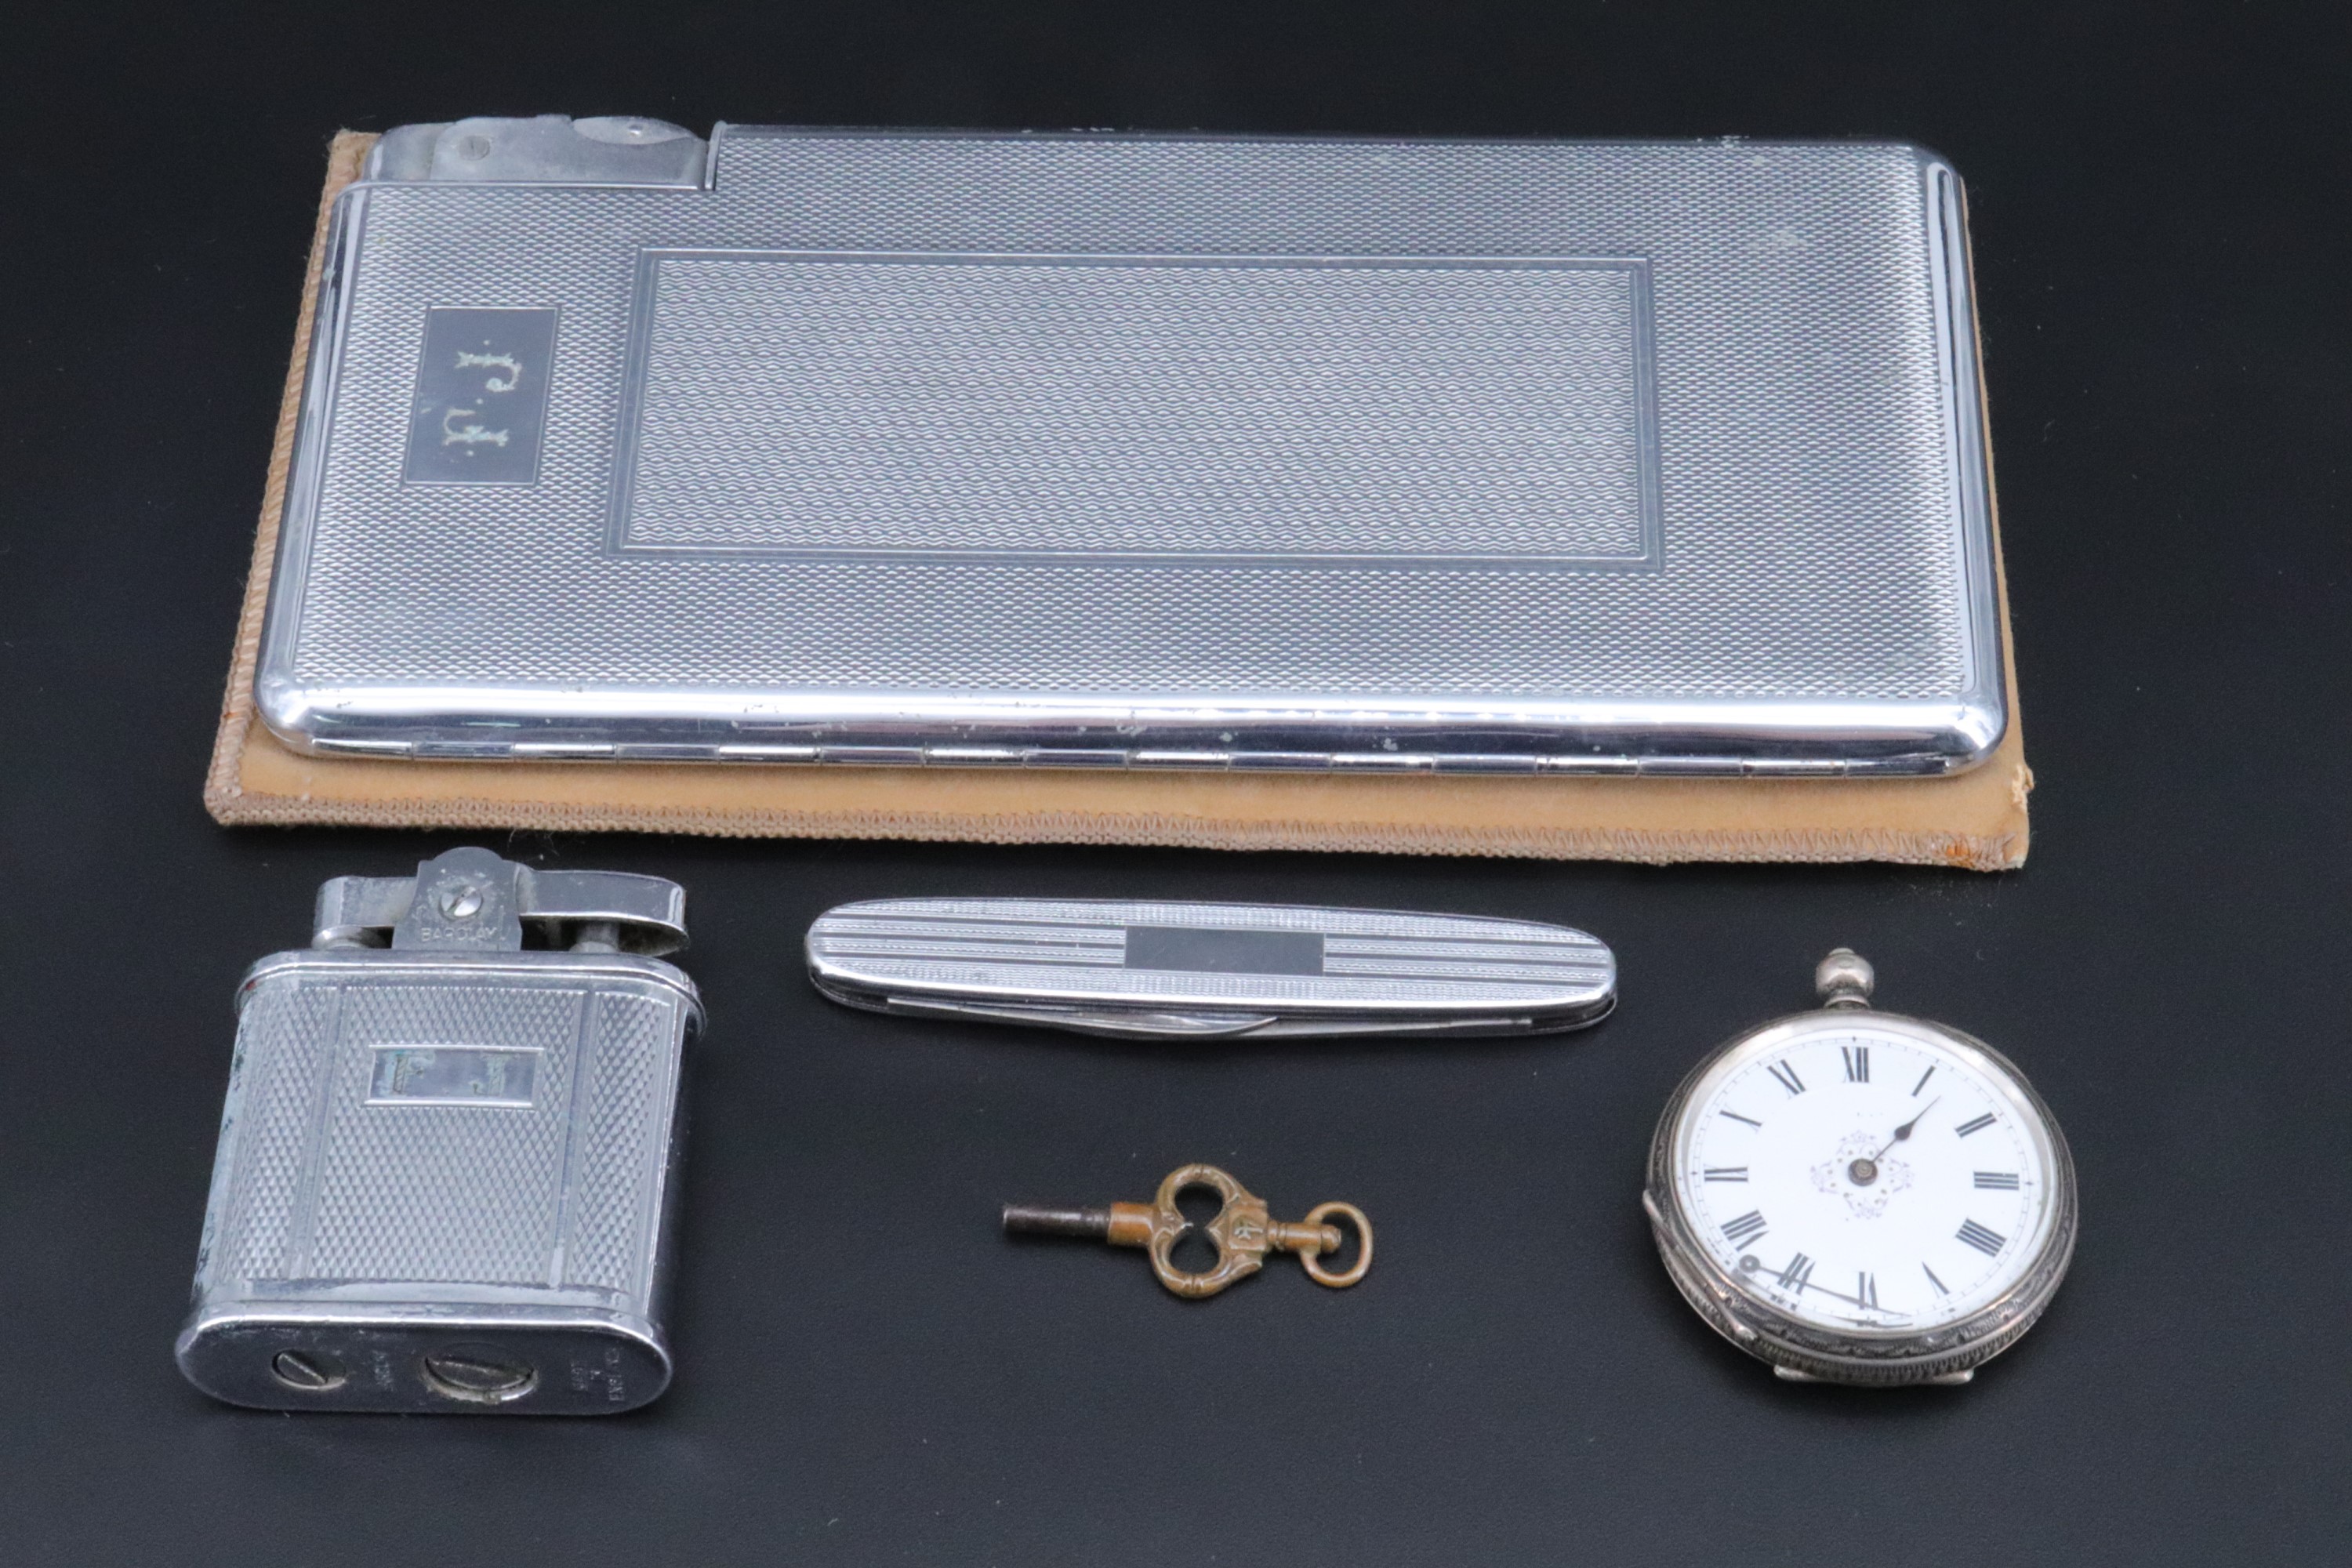 A Kingcraft chromium plated combined cigarette case and lighter, circa 1950s, together with a